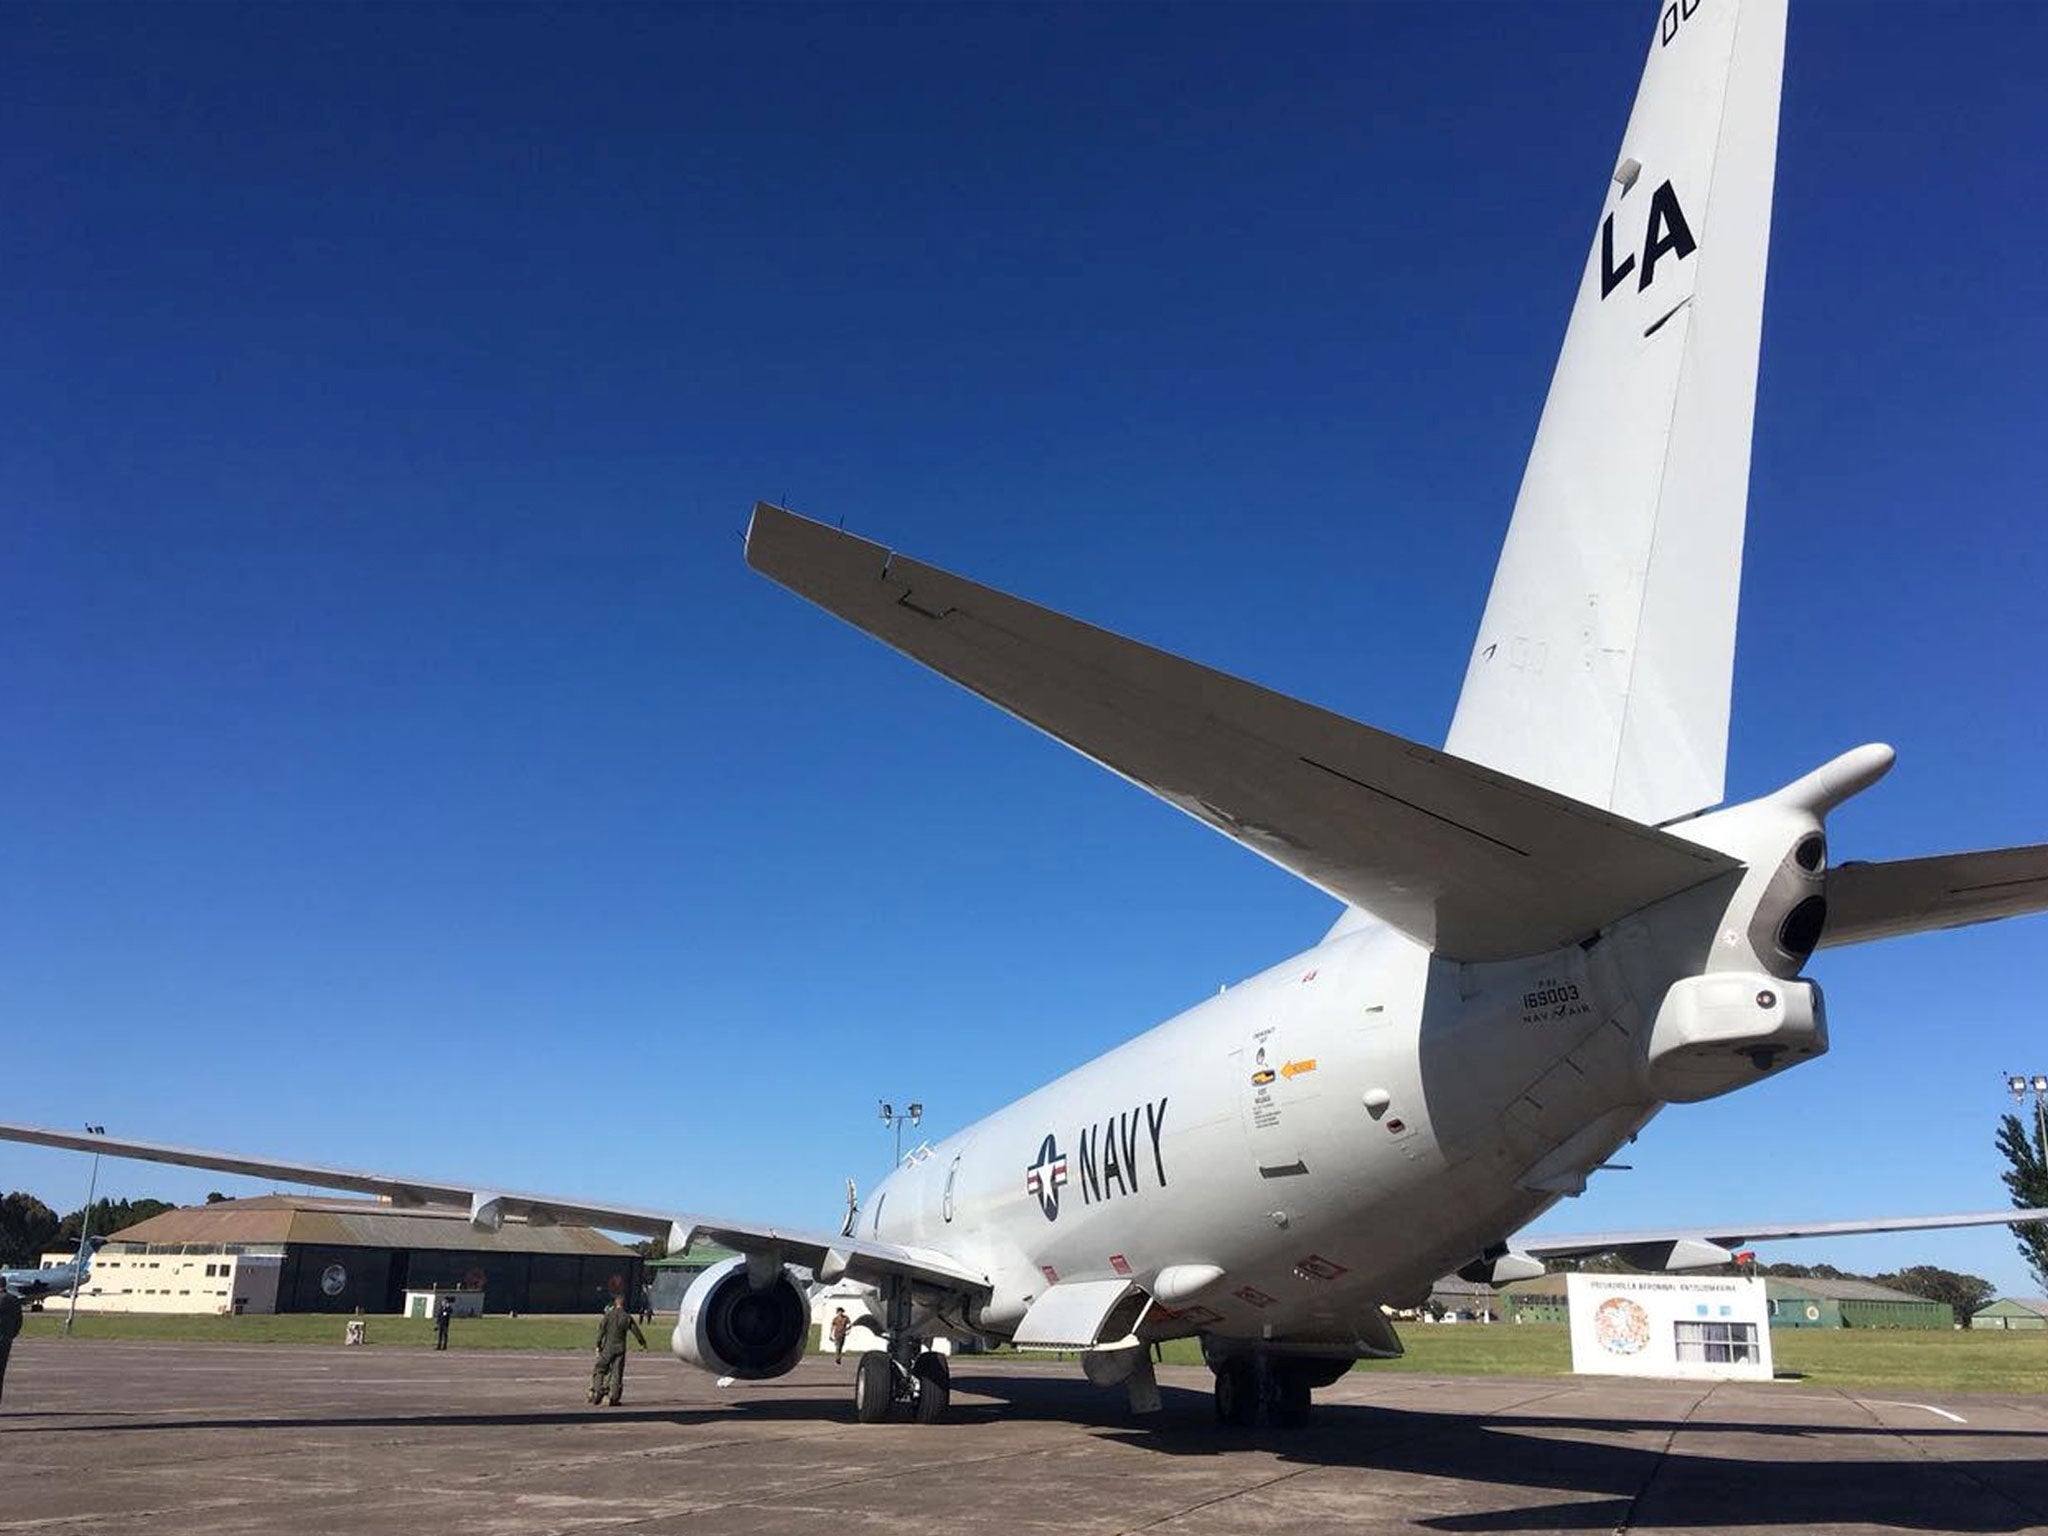 The US Navy's Boeing P-8A Poseidon seen before departing to take part in the search for the ARA San Juan